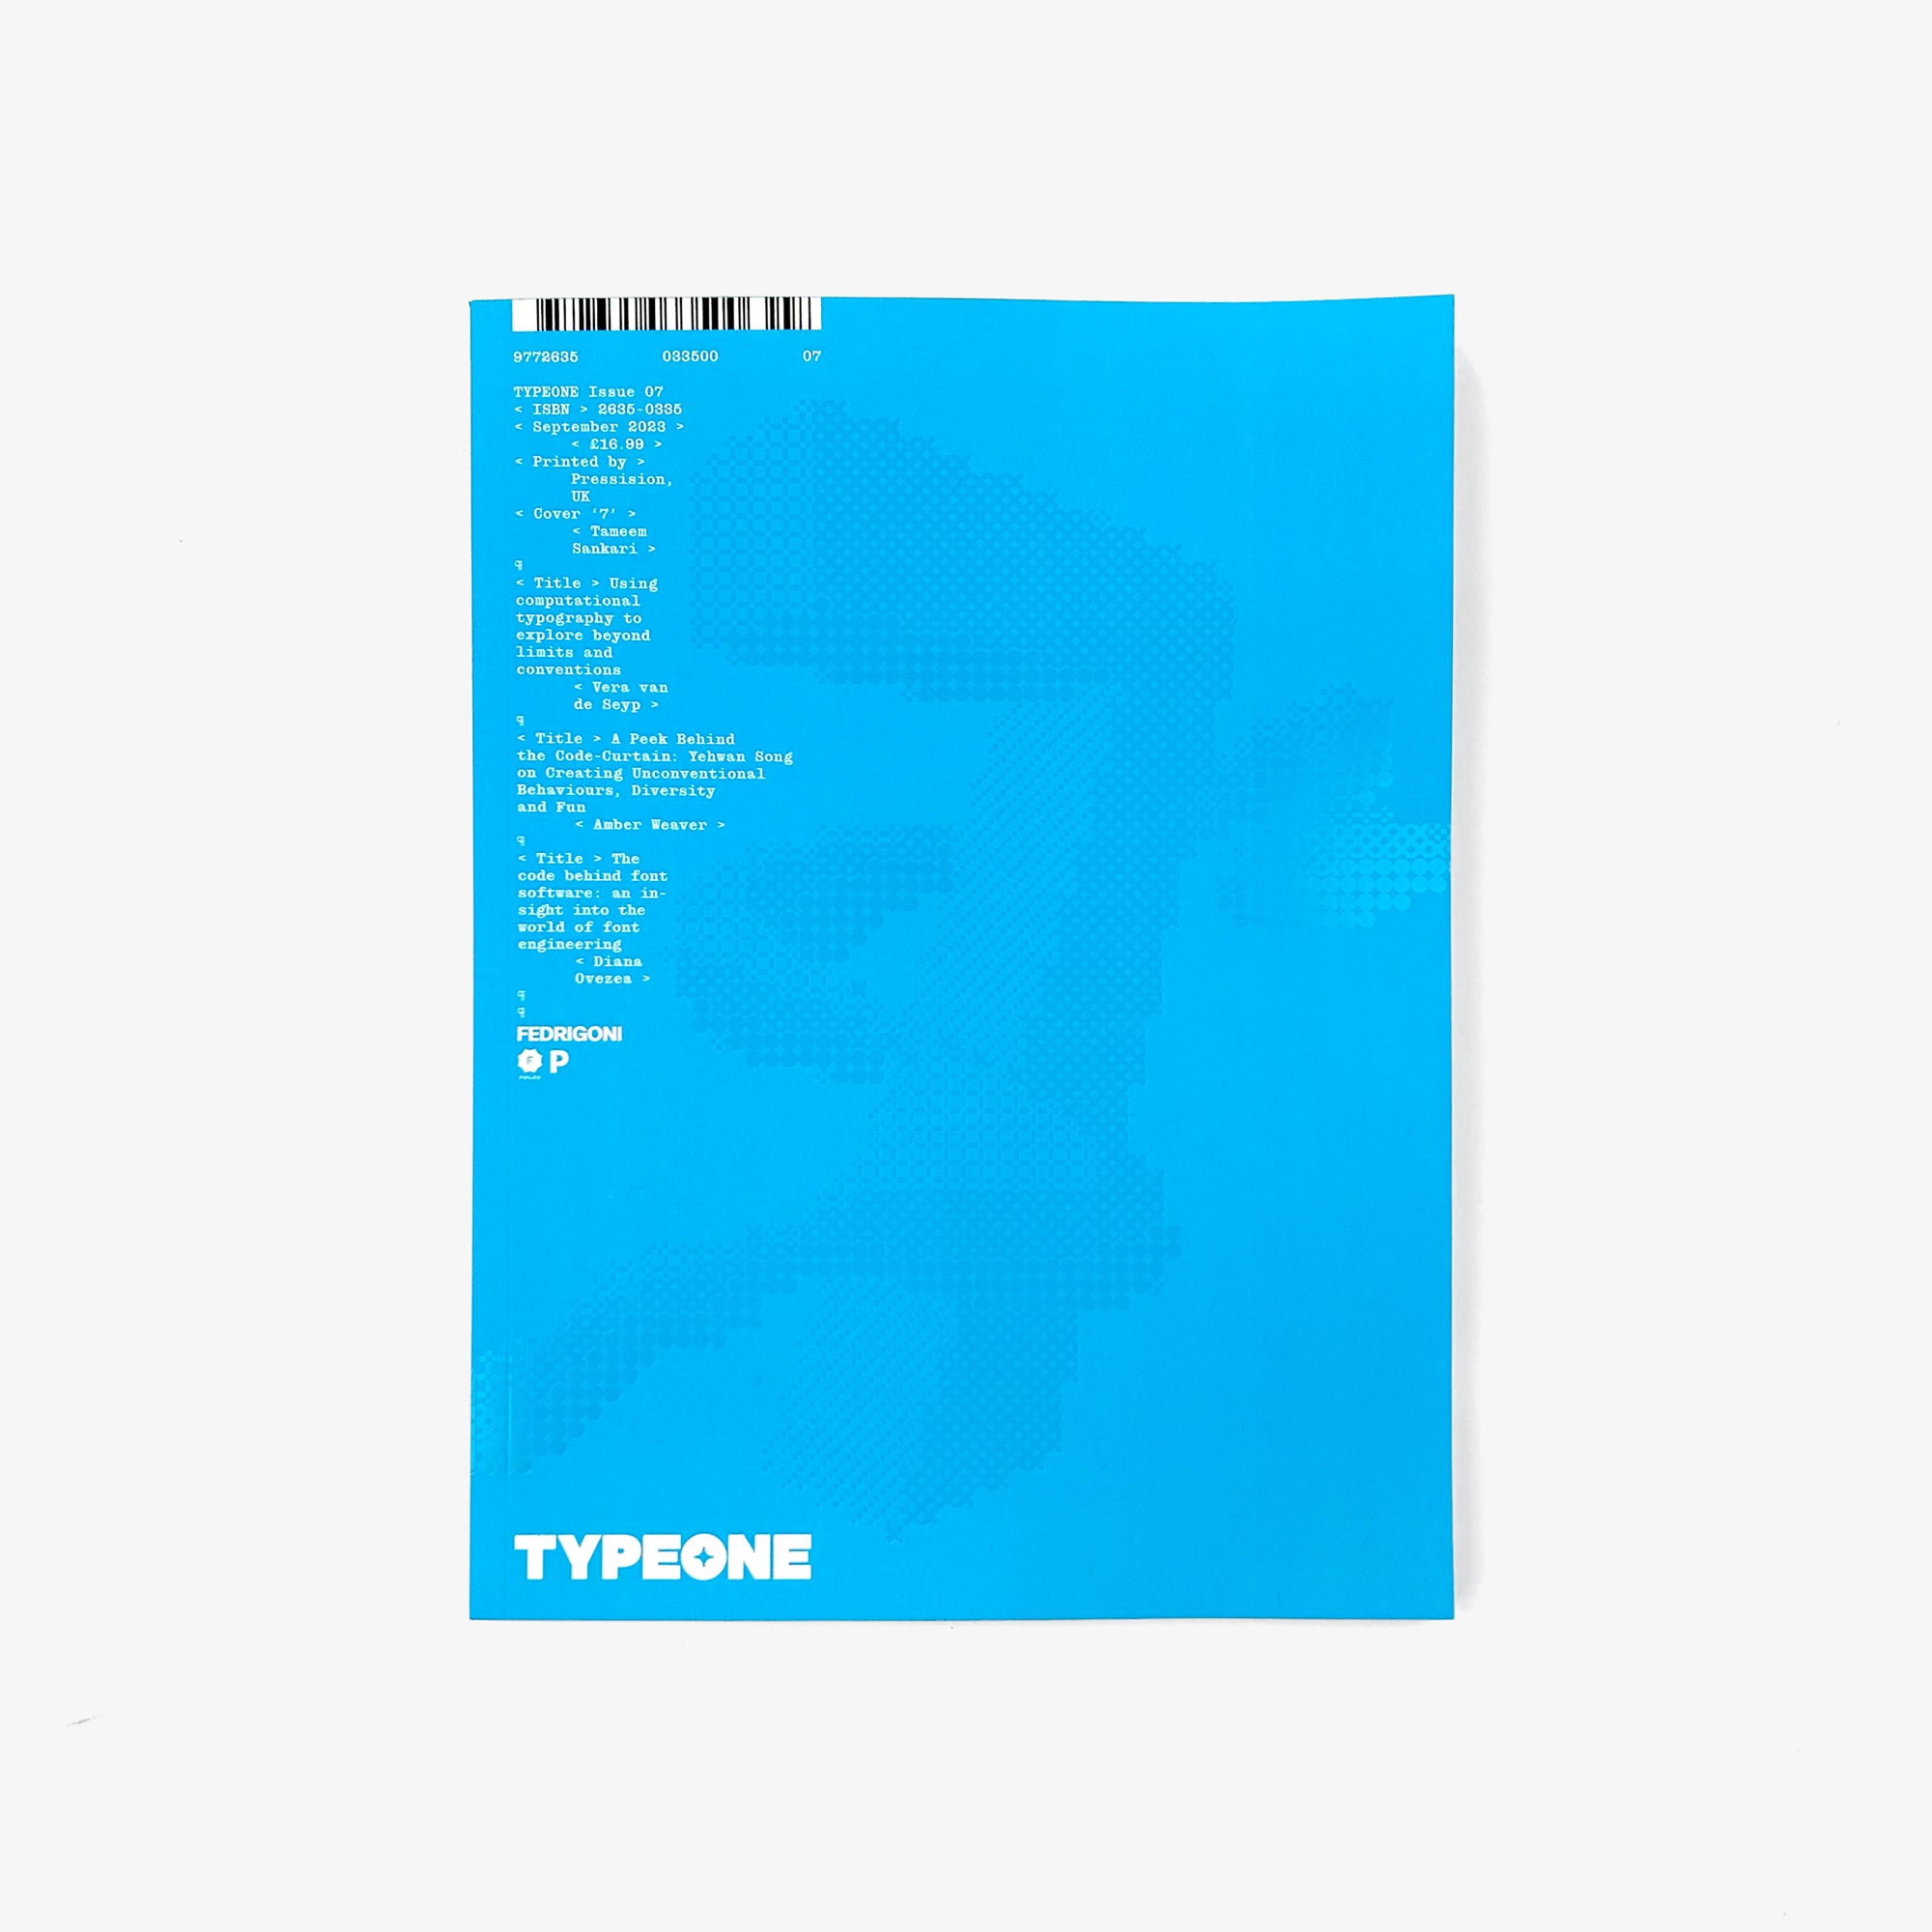 TYPEONE – Issue 7